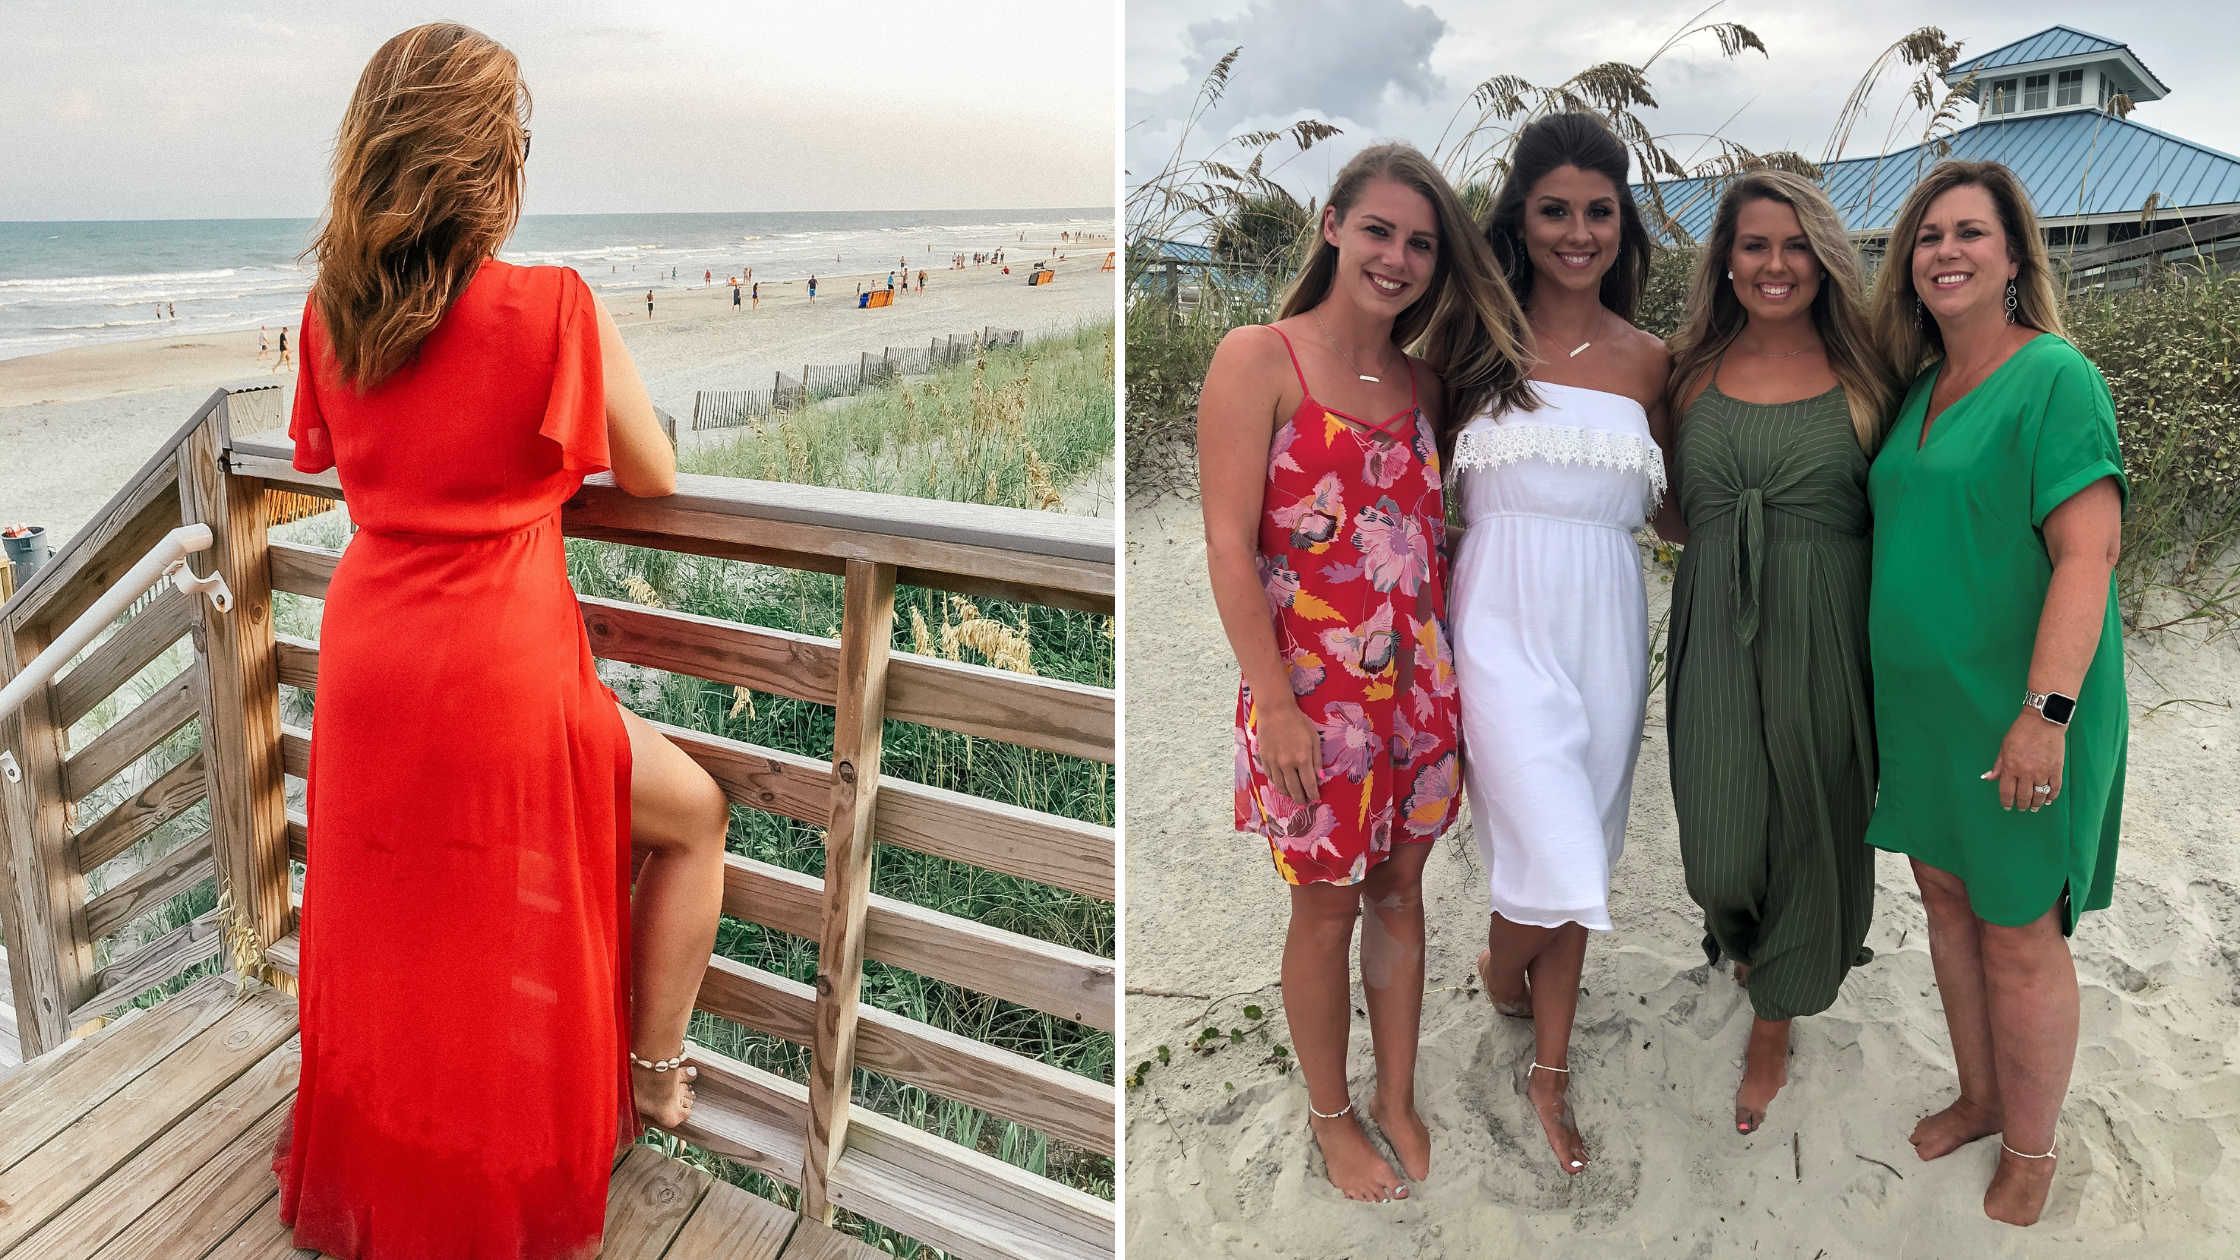 Woman in red dress on the beach and family in dresses on the beach